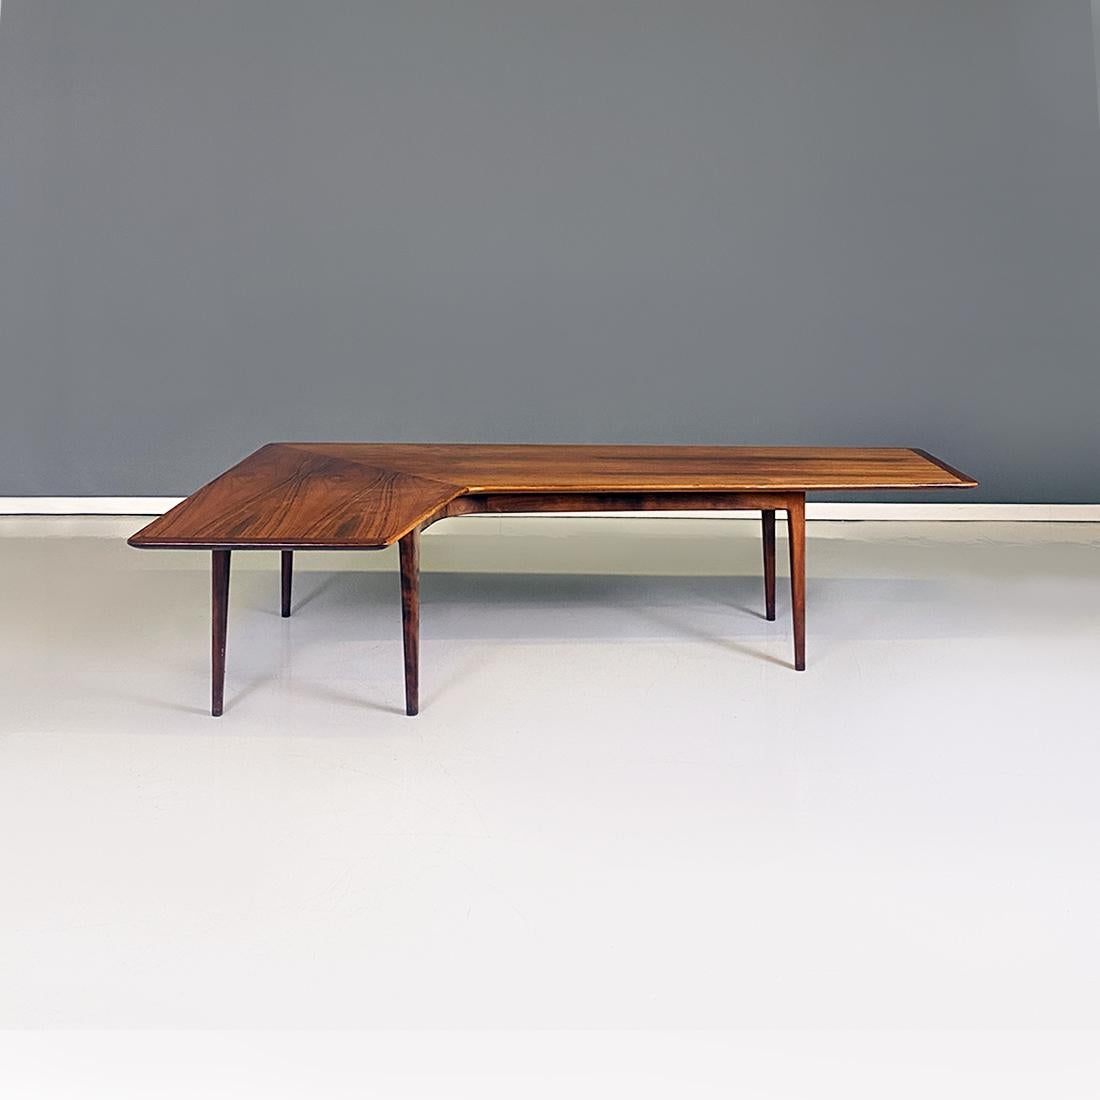 Italian Mid-Century Modern Solid Wood Coffee Table with a Boomerang Shape, 1960s 8